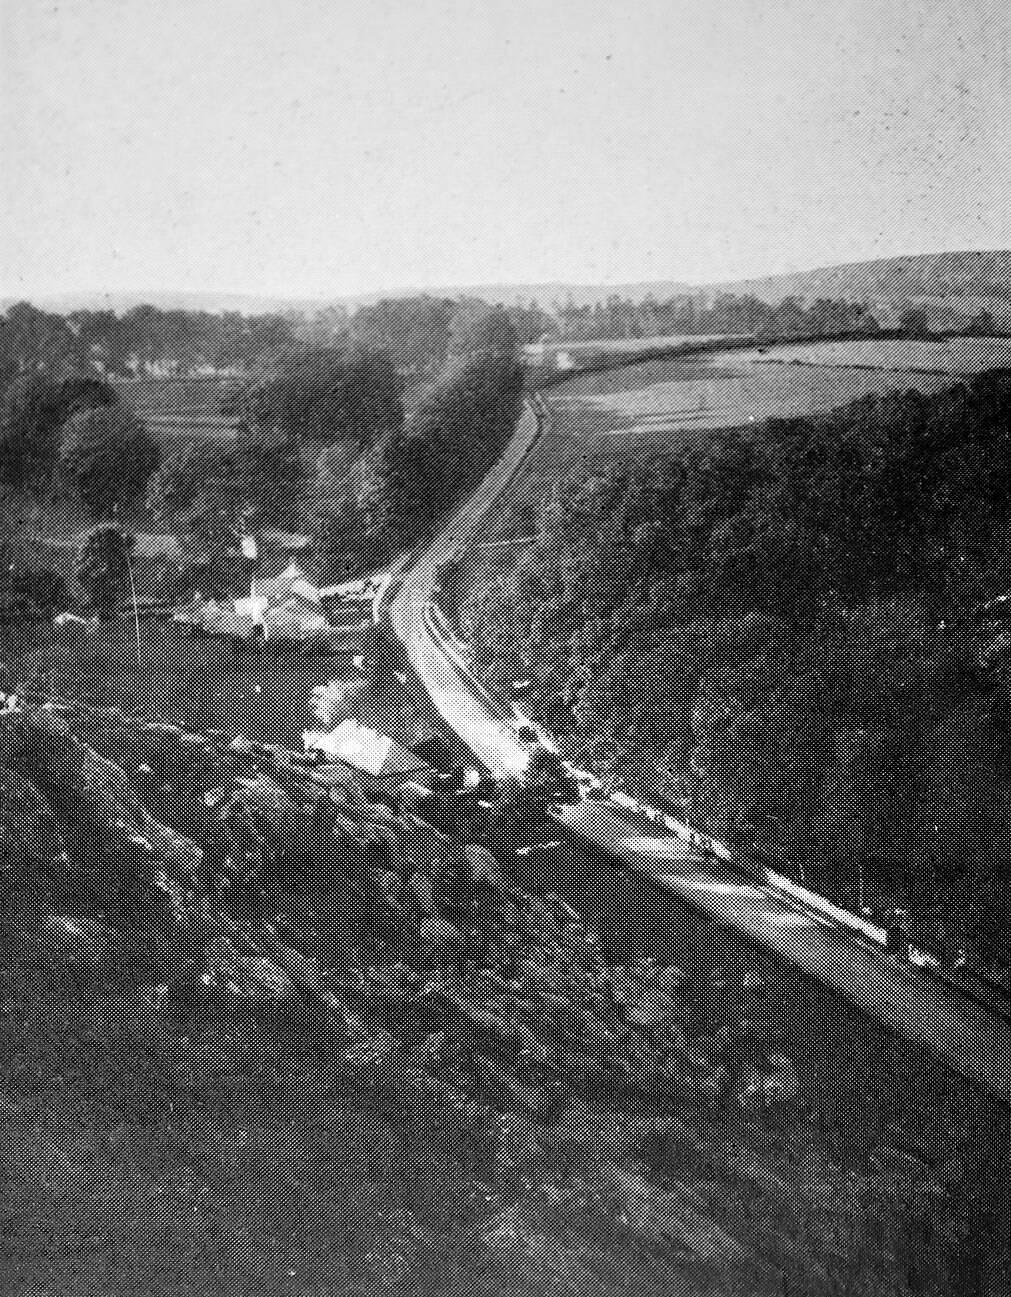 A view of Bray Road taken from the Scalp in County Dublin, 1920s.